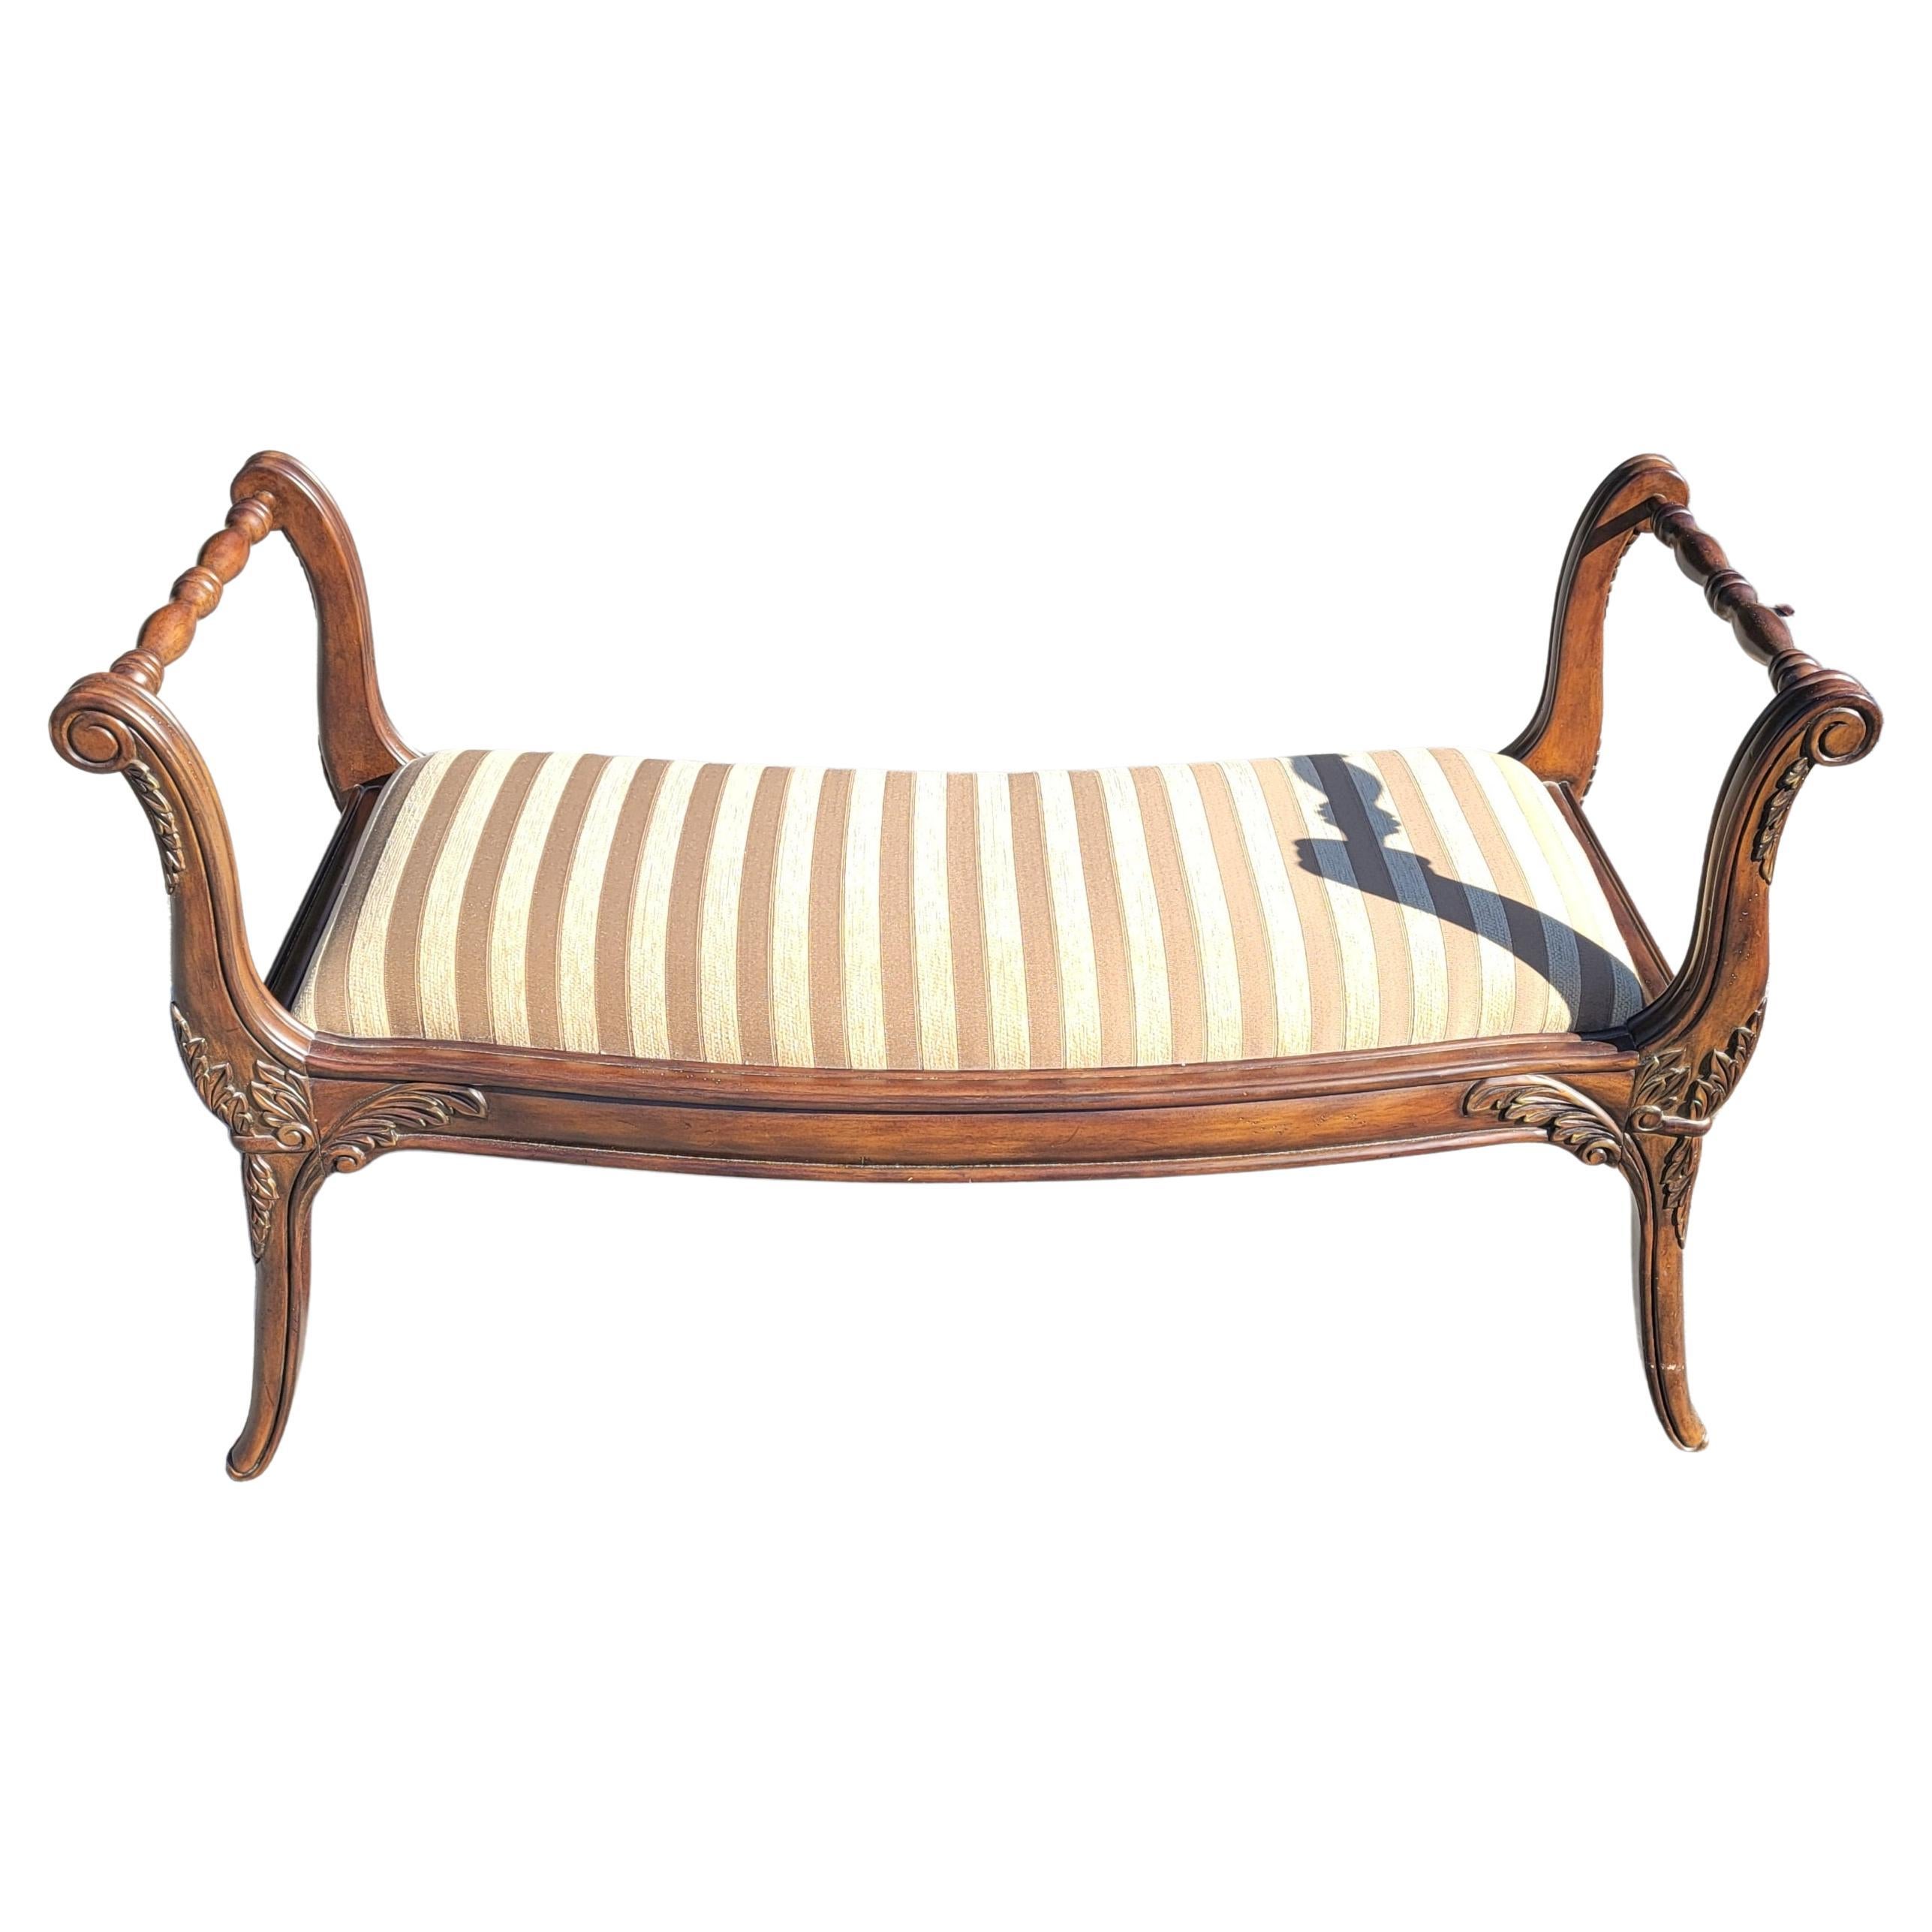 Contemporary Vintage Georgian Style Carved Walnut and Upholstered Two-Seater Bench